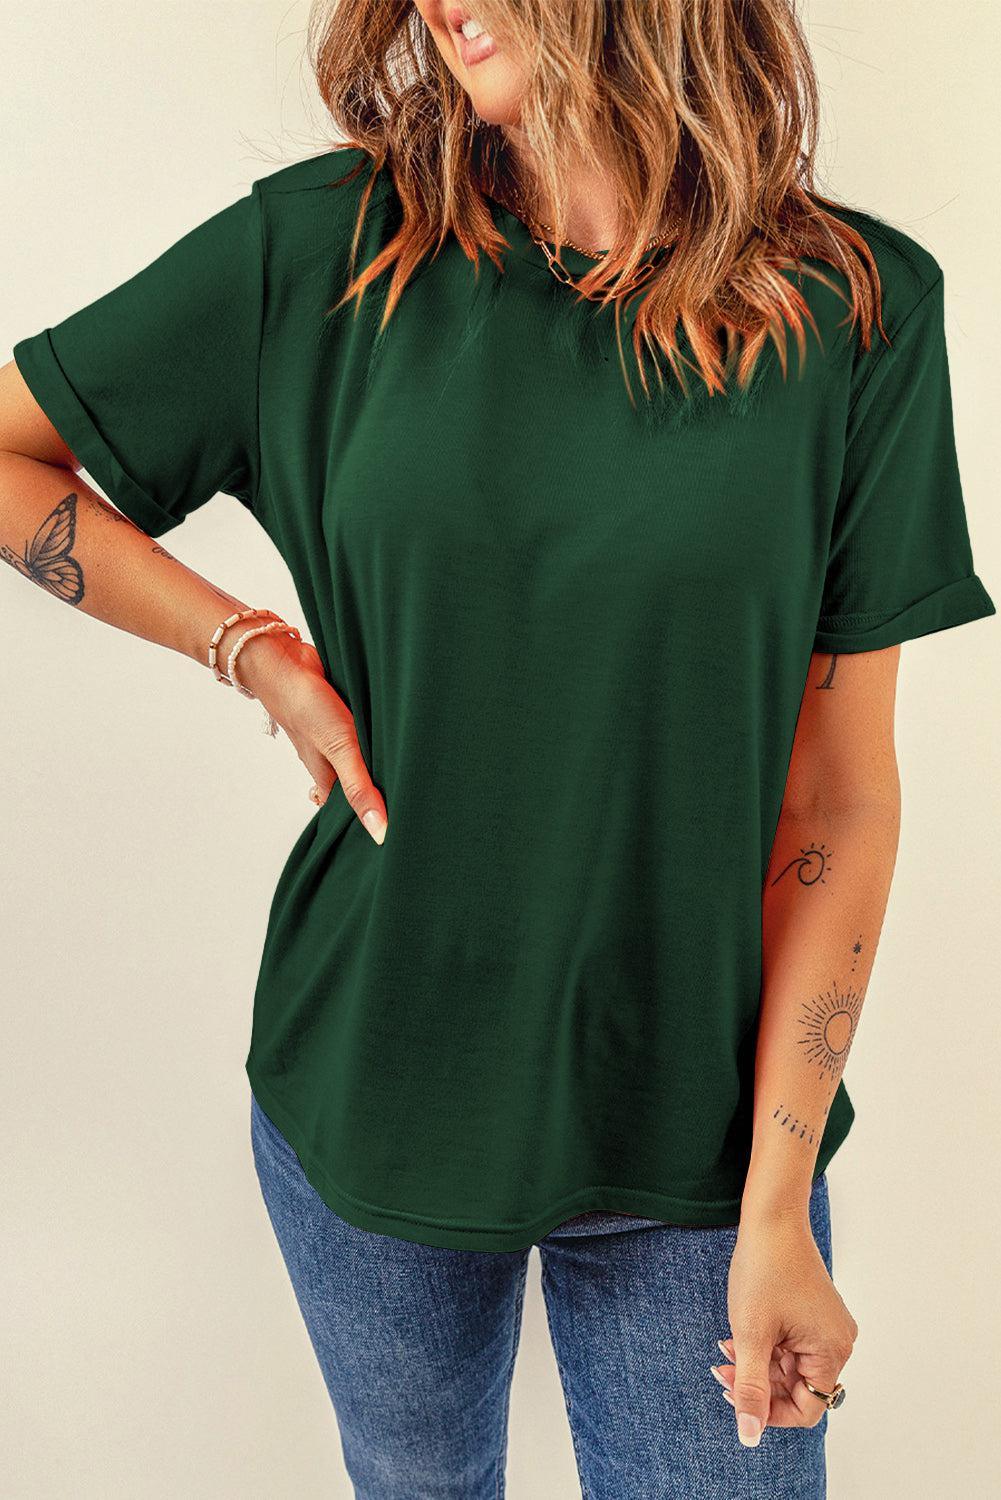 a woman wearing a green shirt and jeans